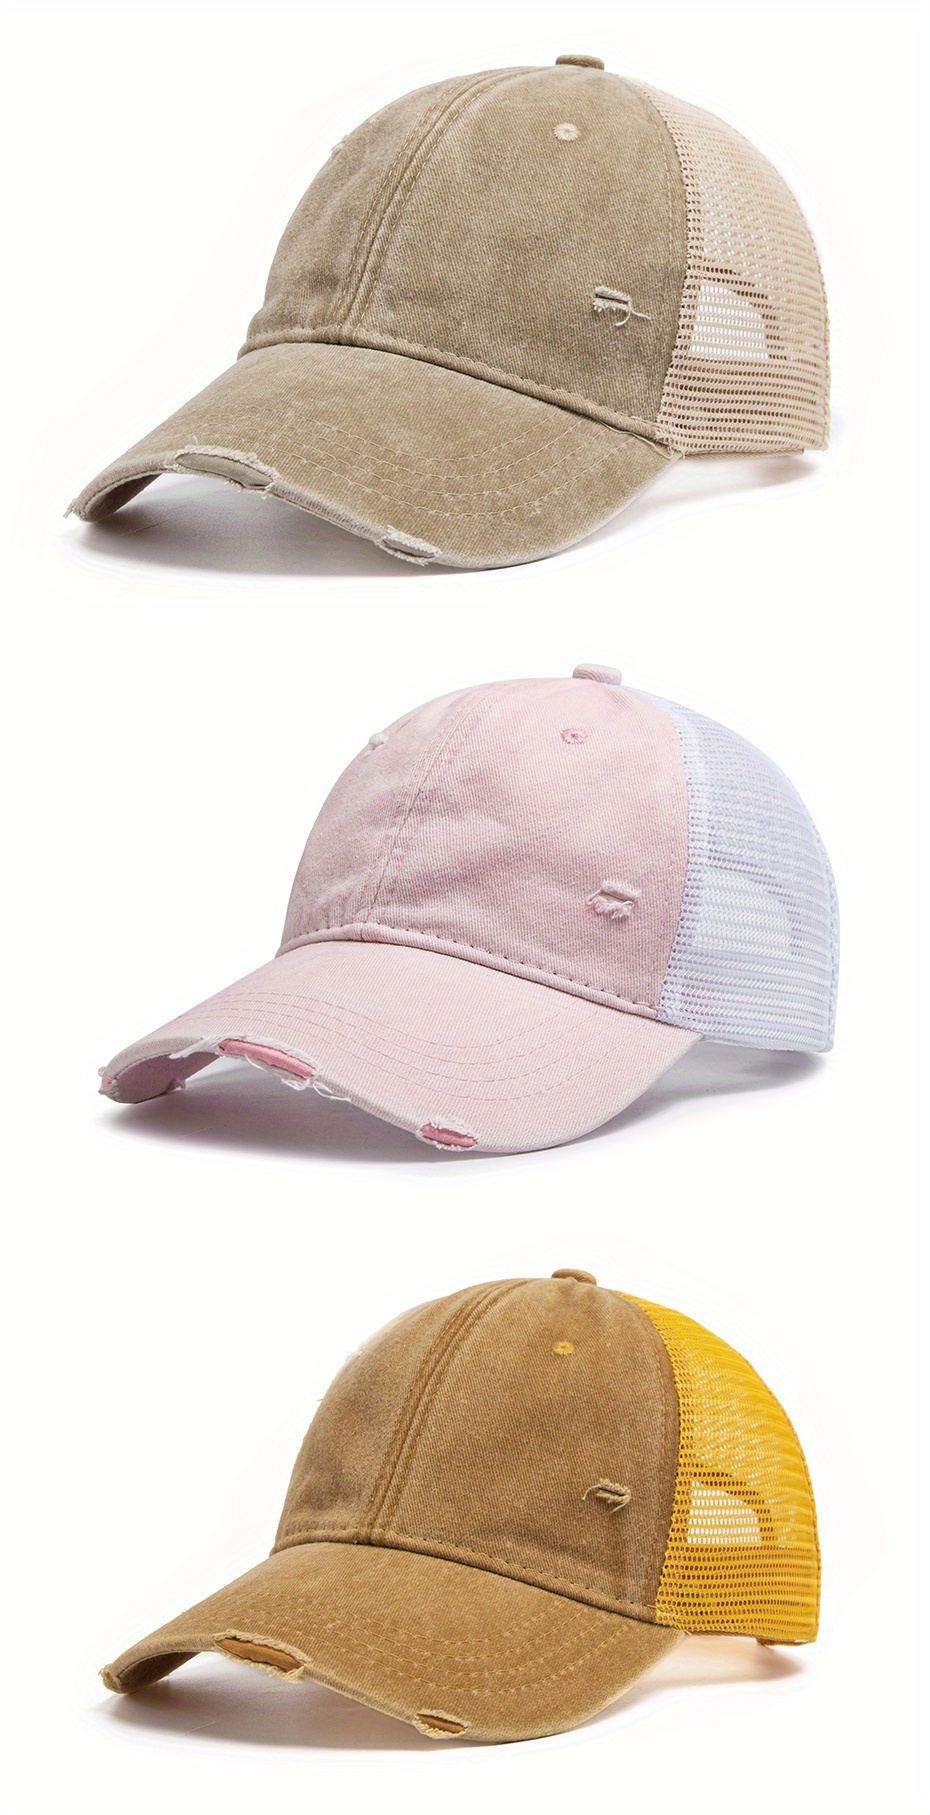 Summer Cotton Washed Hole Kangol Washed Baseball Cap For Men And Women  Solid Sunhat With Snapback, Retro Ponytail Visor Hip Hop Fishing Hat  R230220 From Us_new_mexico, $11.11